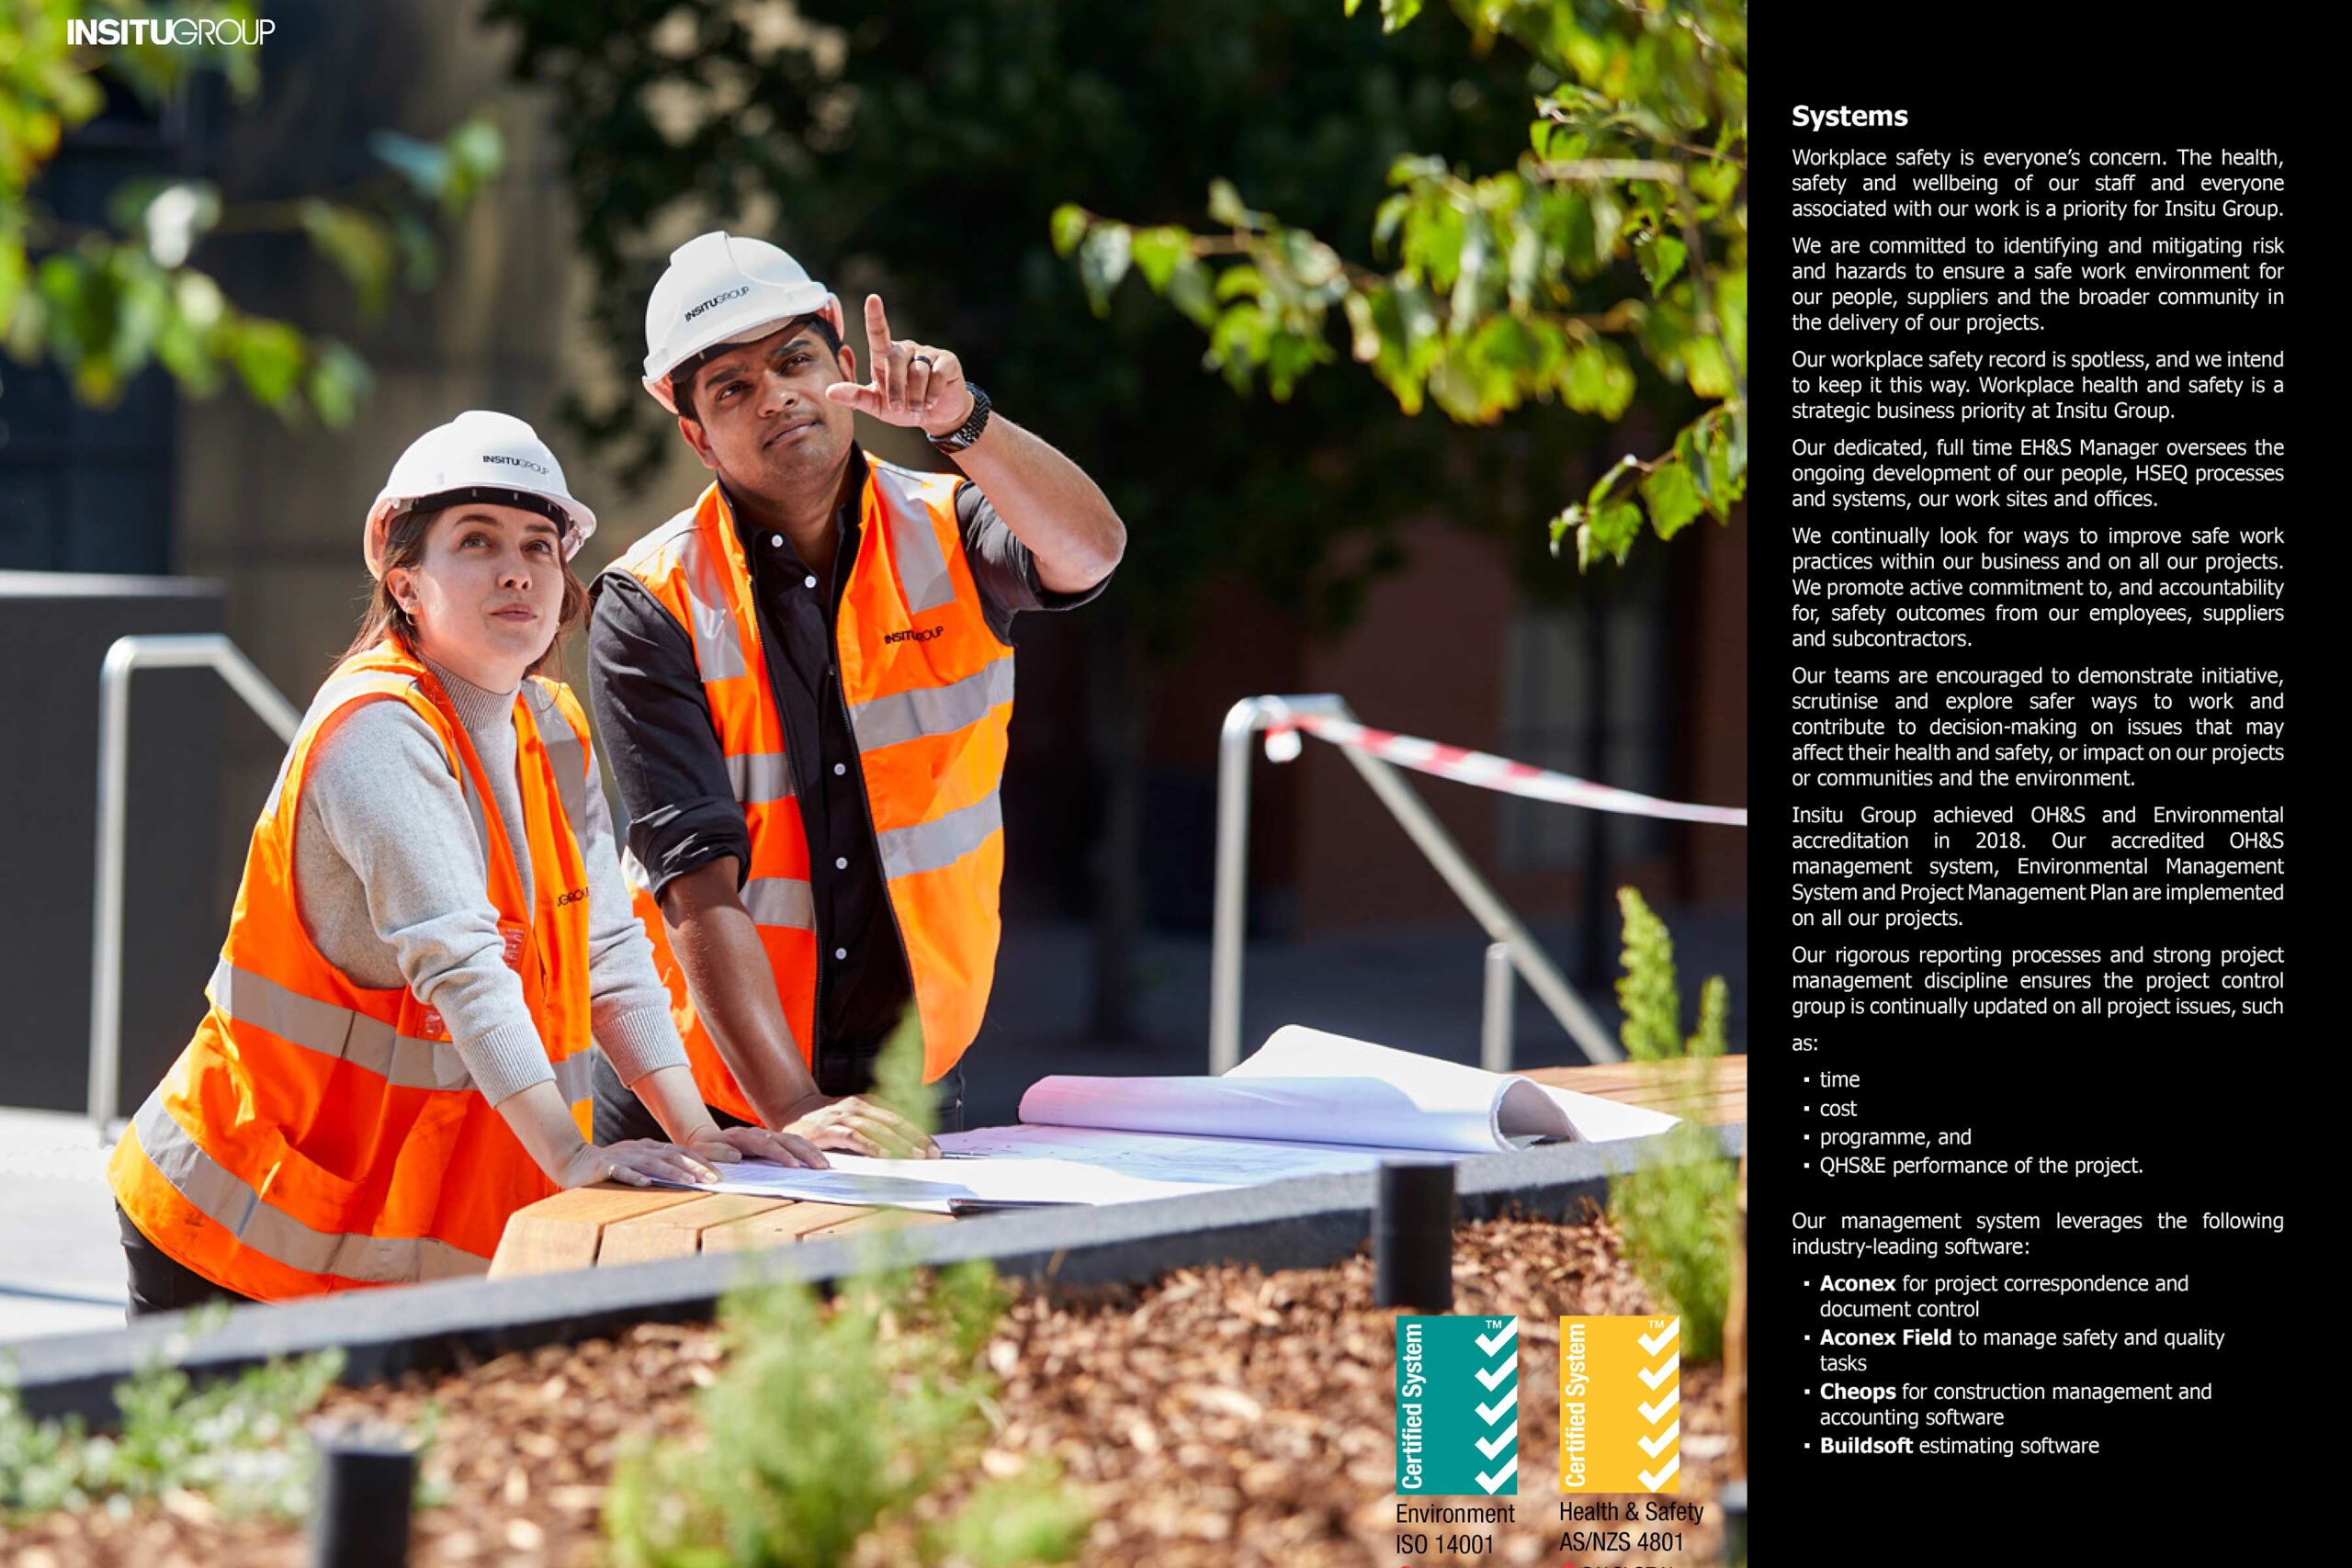 Corporate Photography showing people from the Insitu Group team promoting their work safety capabilities. Potographed at one of the building projects in Melbourne